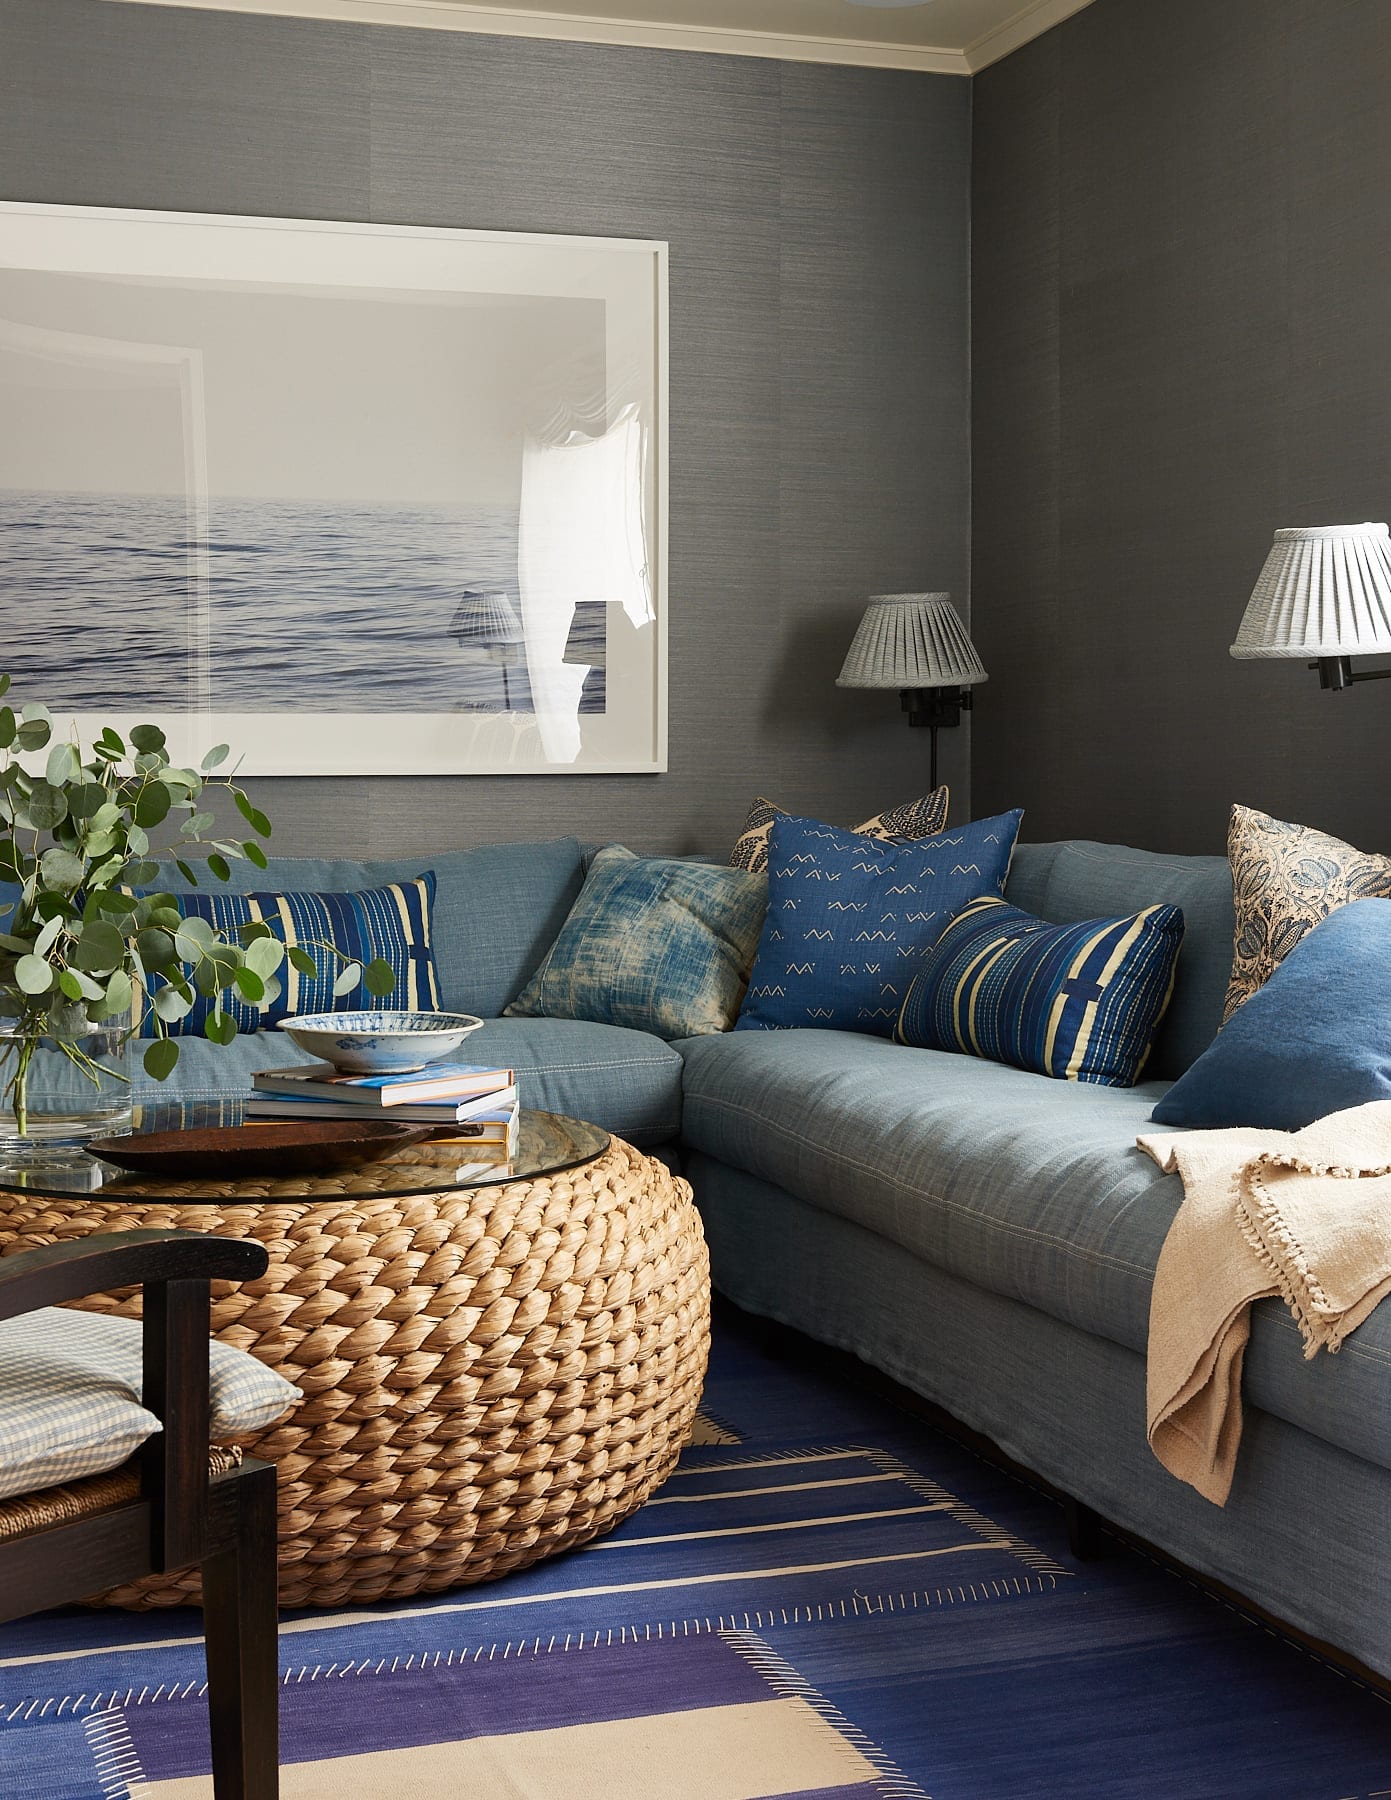 Malibu beach house Mark D. Sikes Amy Neunsinger Photography family room in blue and white